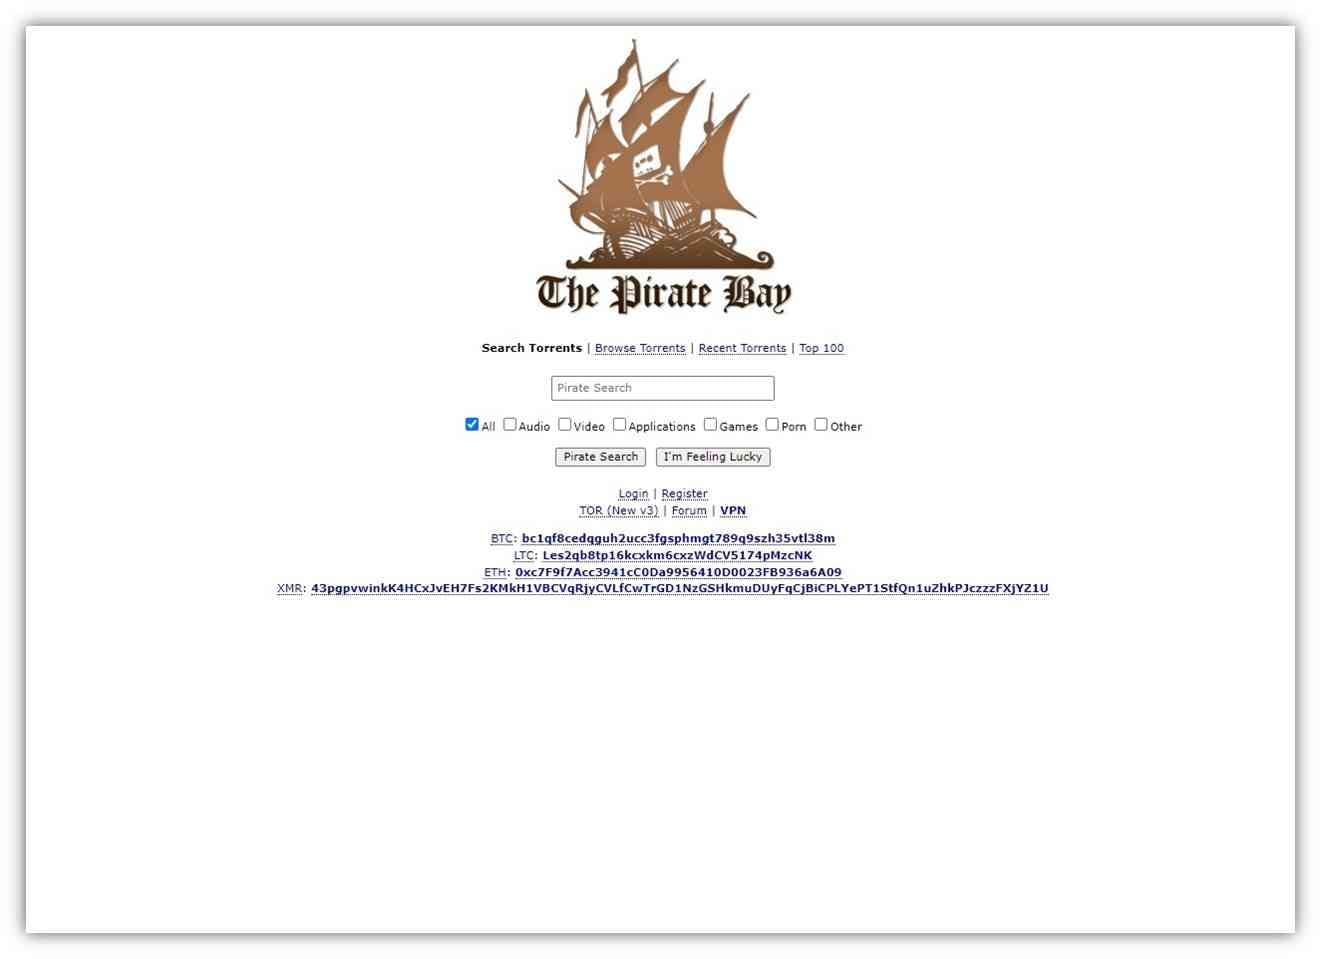 top torrent - The Pirate Bay